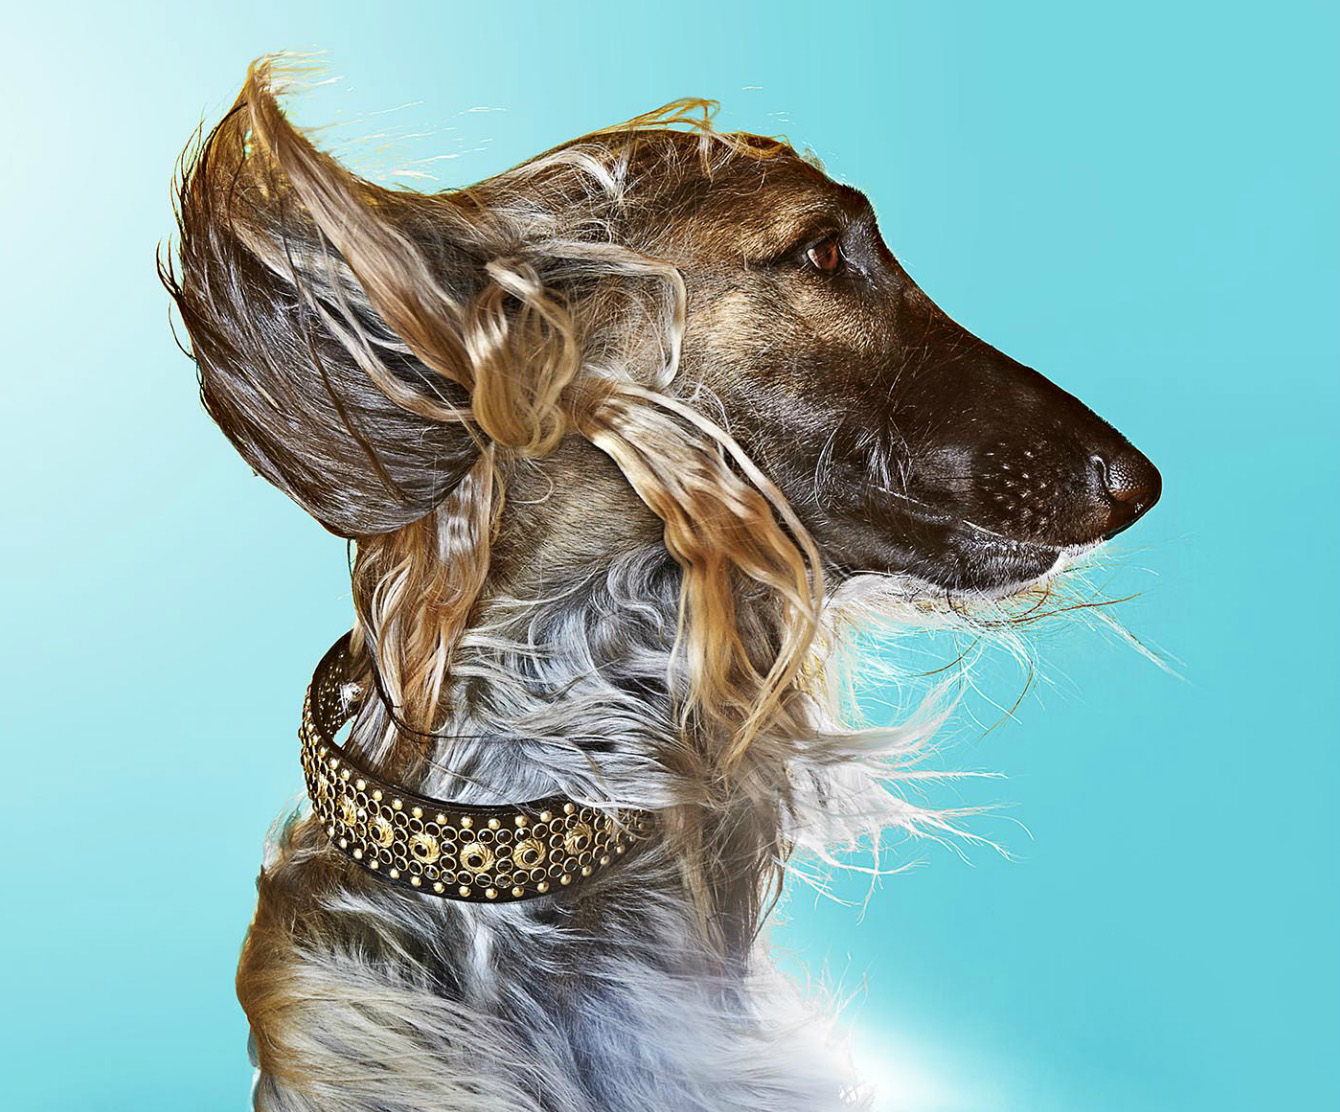 Profile Of Afghan Hound Against Blue Background With Wind Blowing